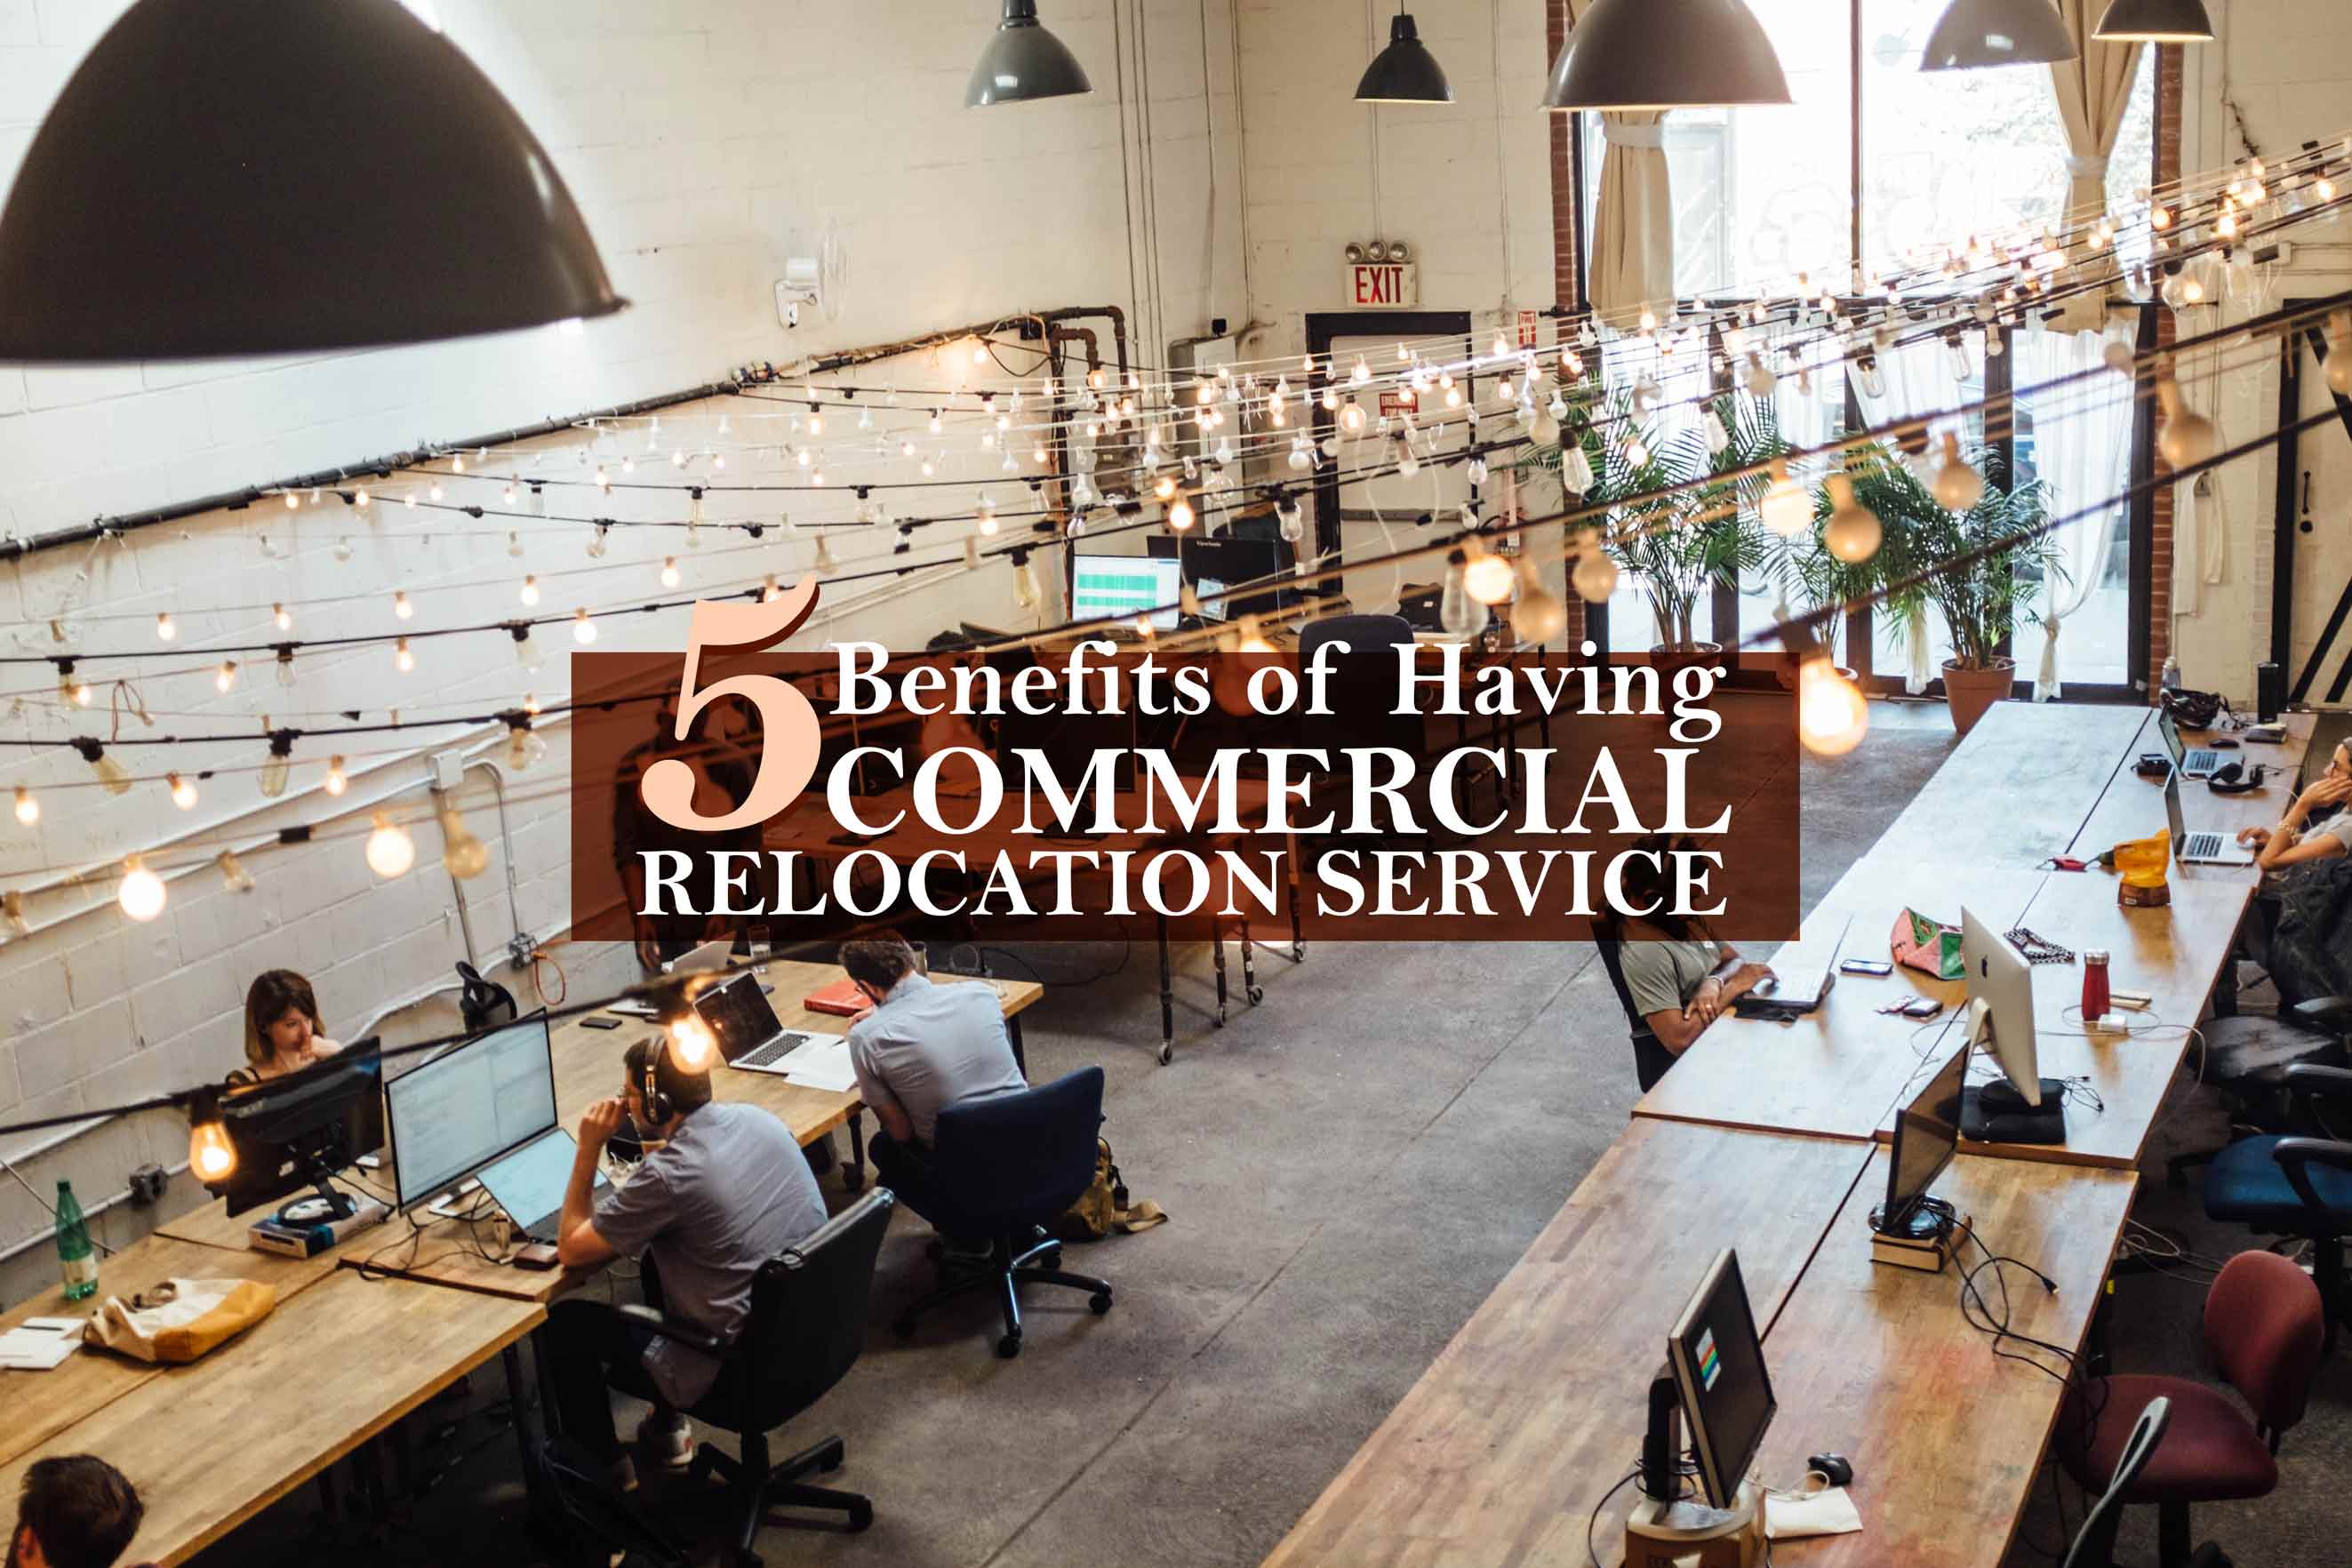 Benefits of Commercial Relocation Service